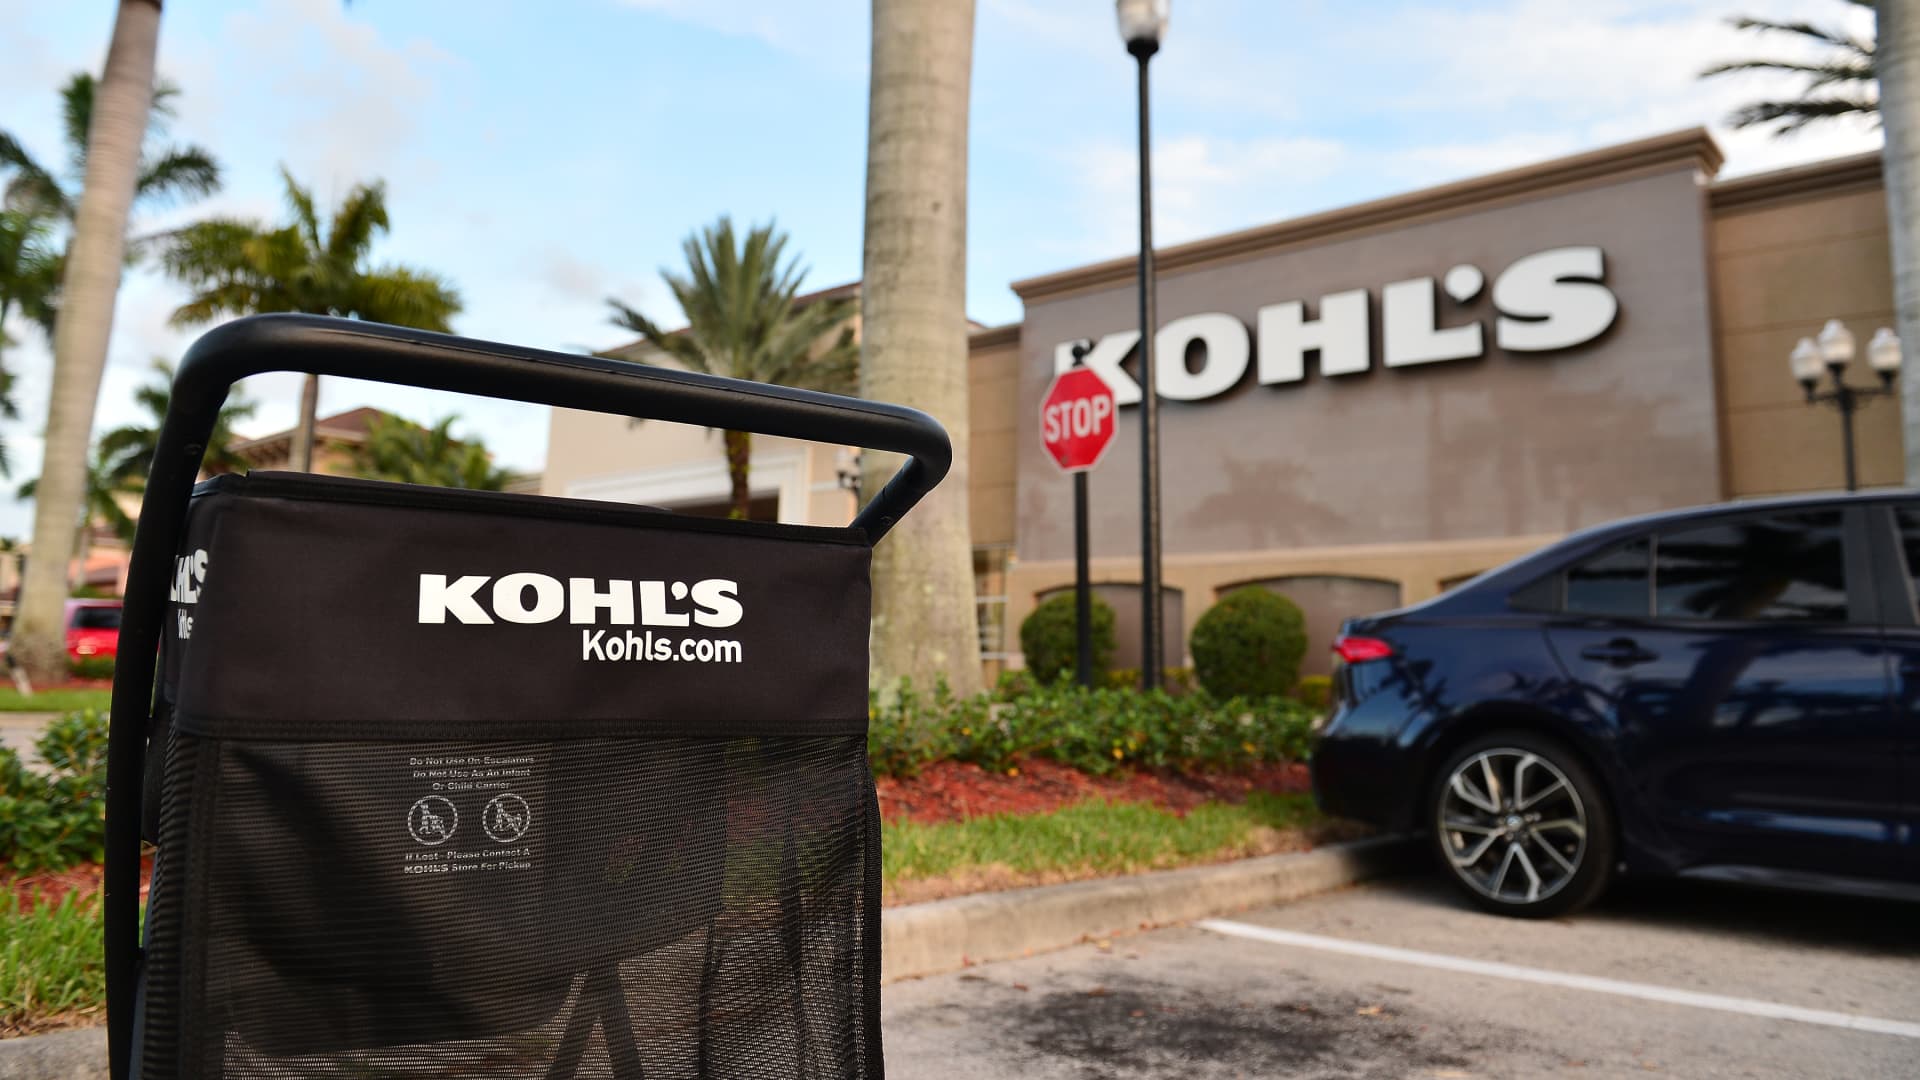 Wisconsin senator urges Kohl’s to reject buyout offers that threaten jobs in retailer’s home state